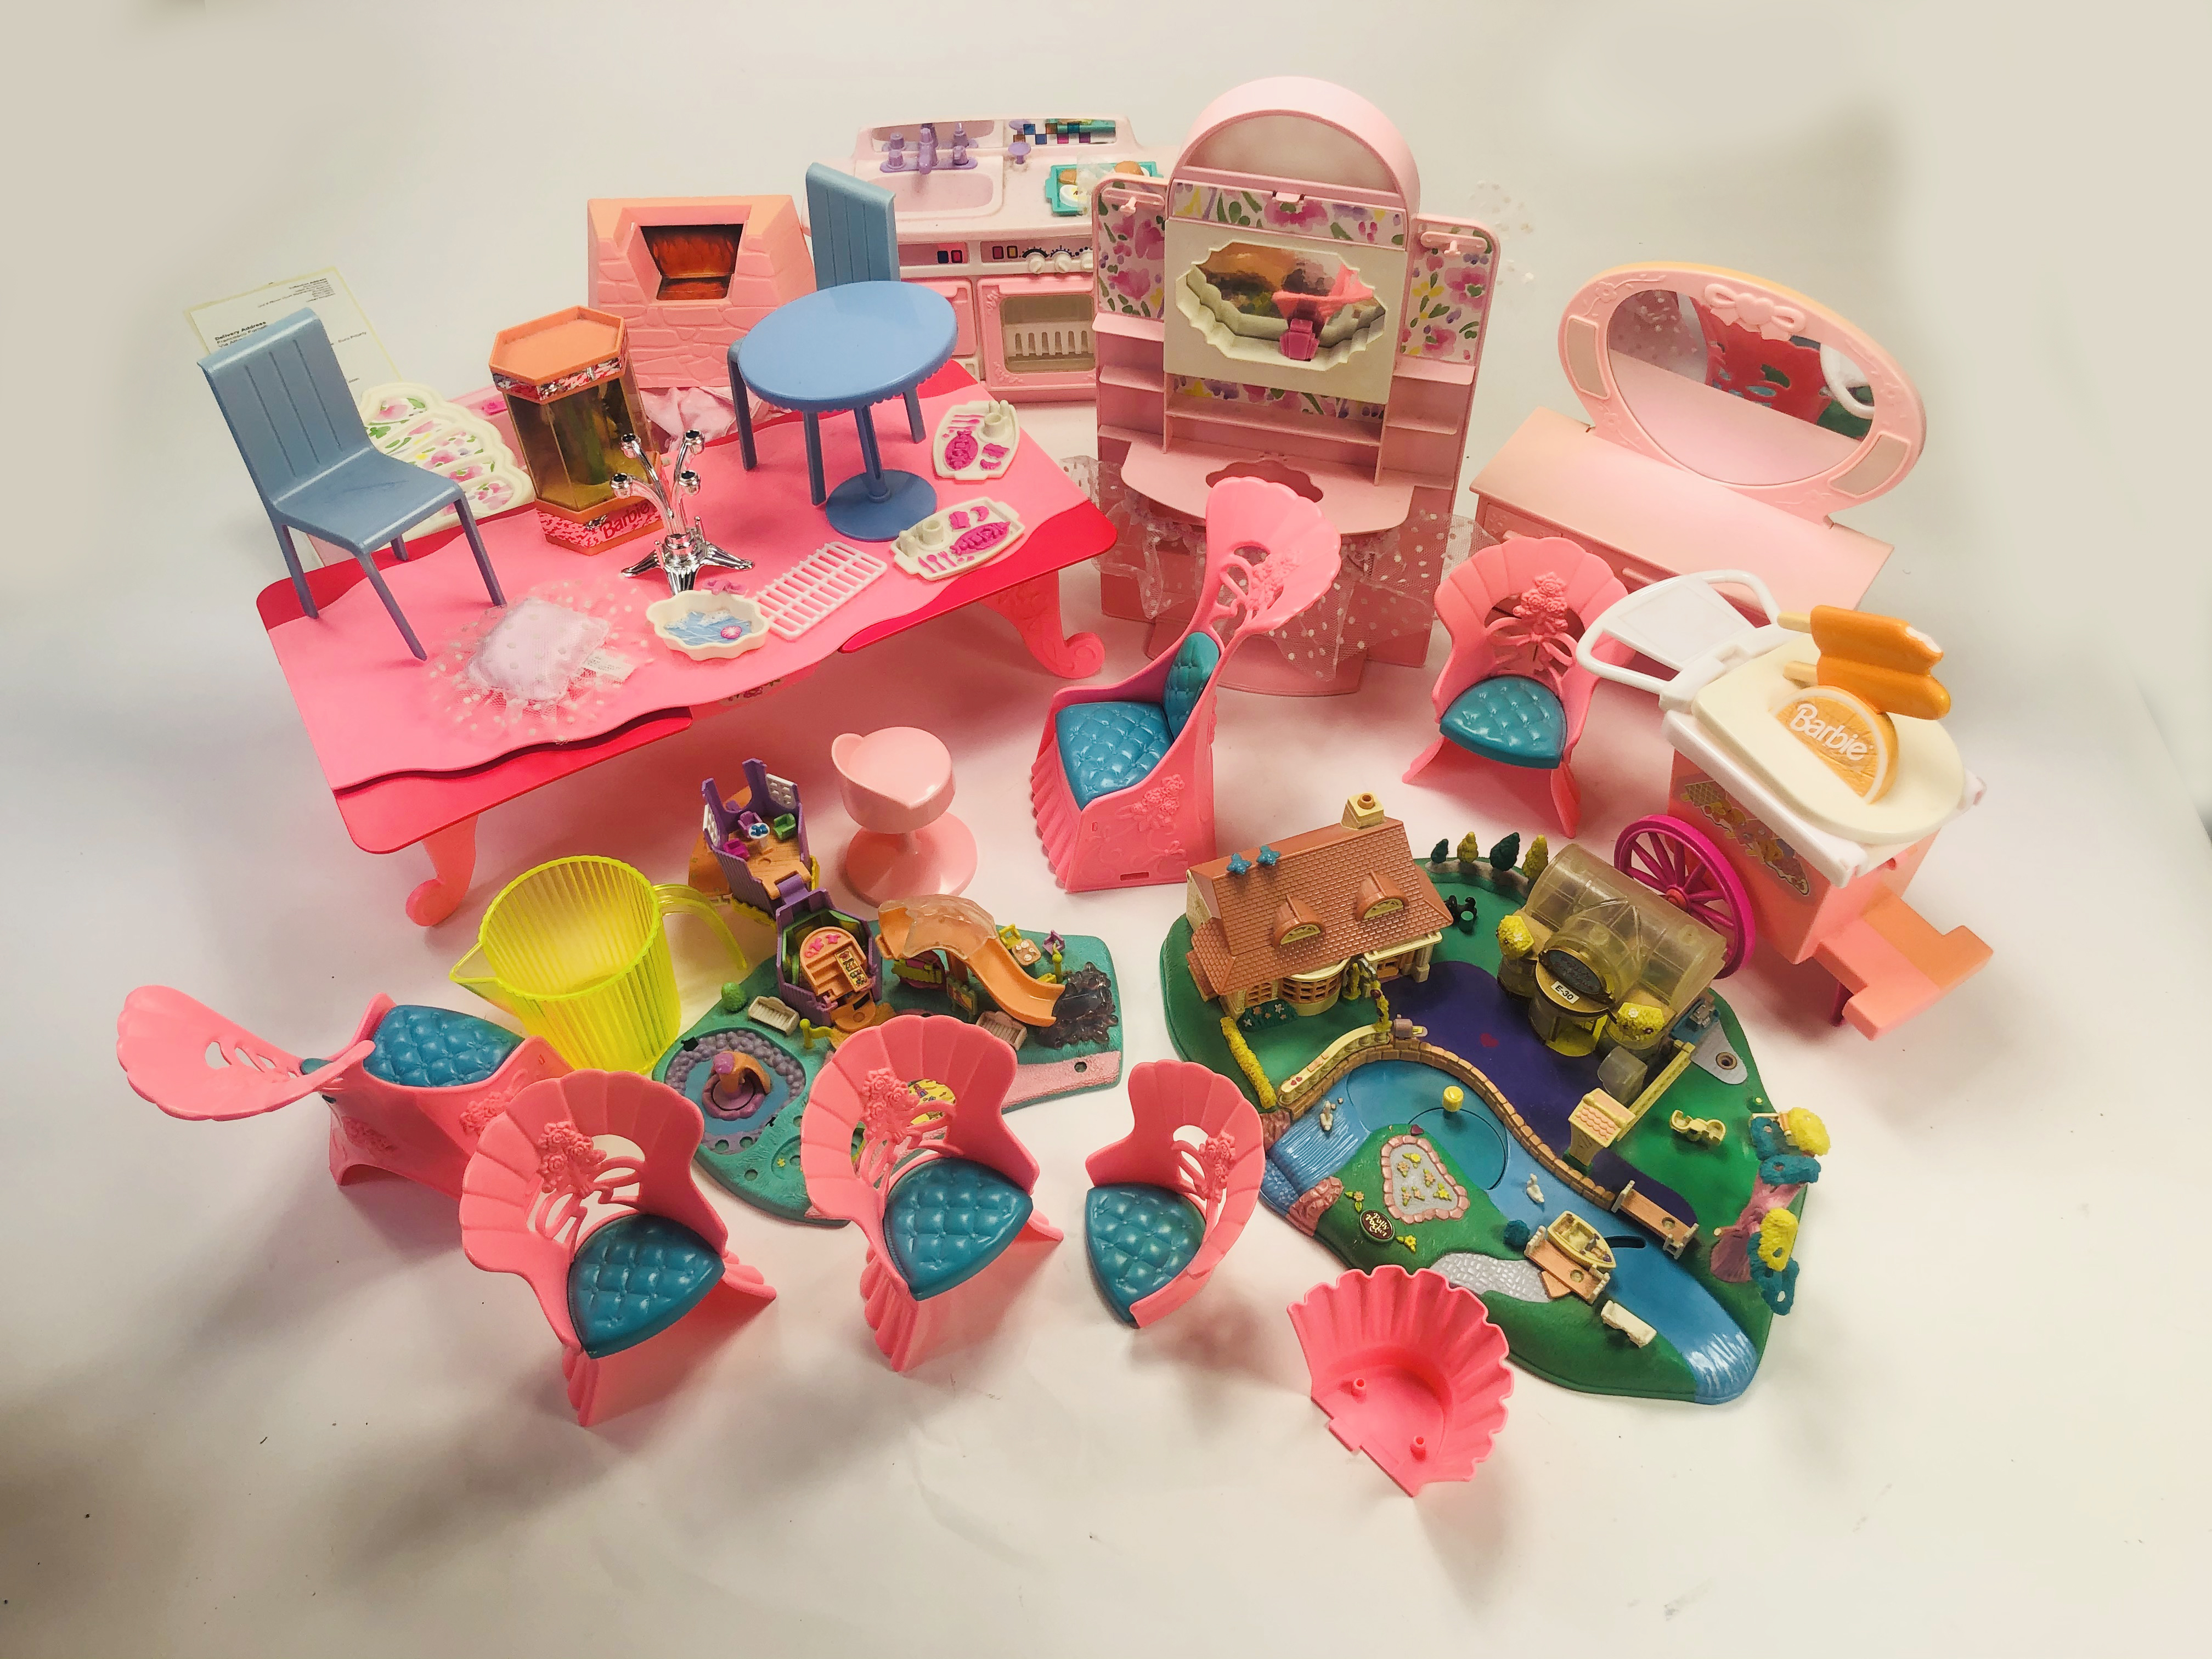 A group of Sindy / Barbie Furniture plus original Polly Pocket issues. Would benefit from a